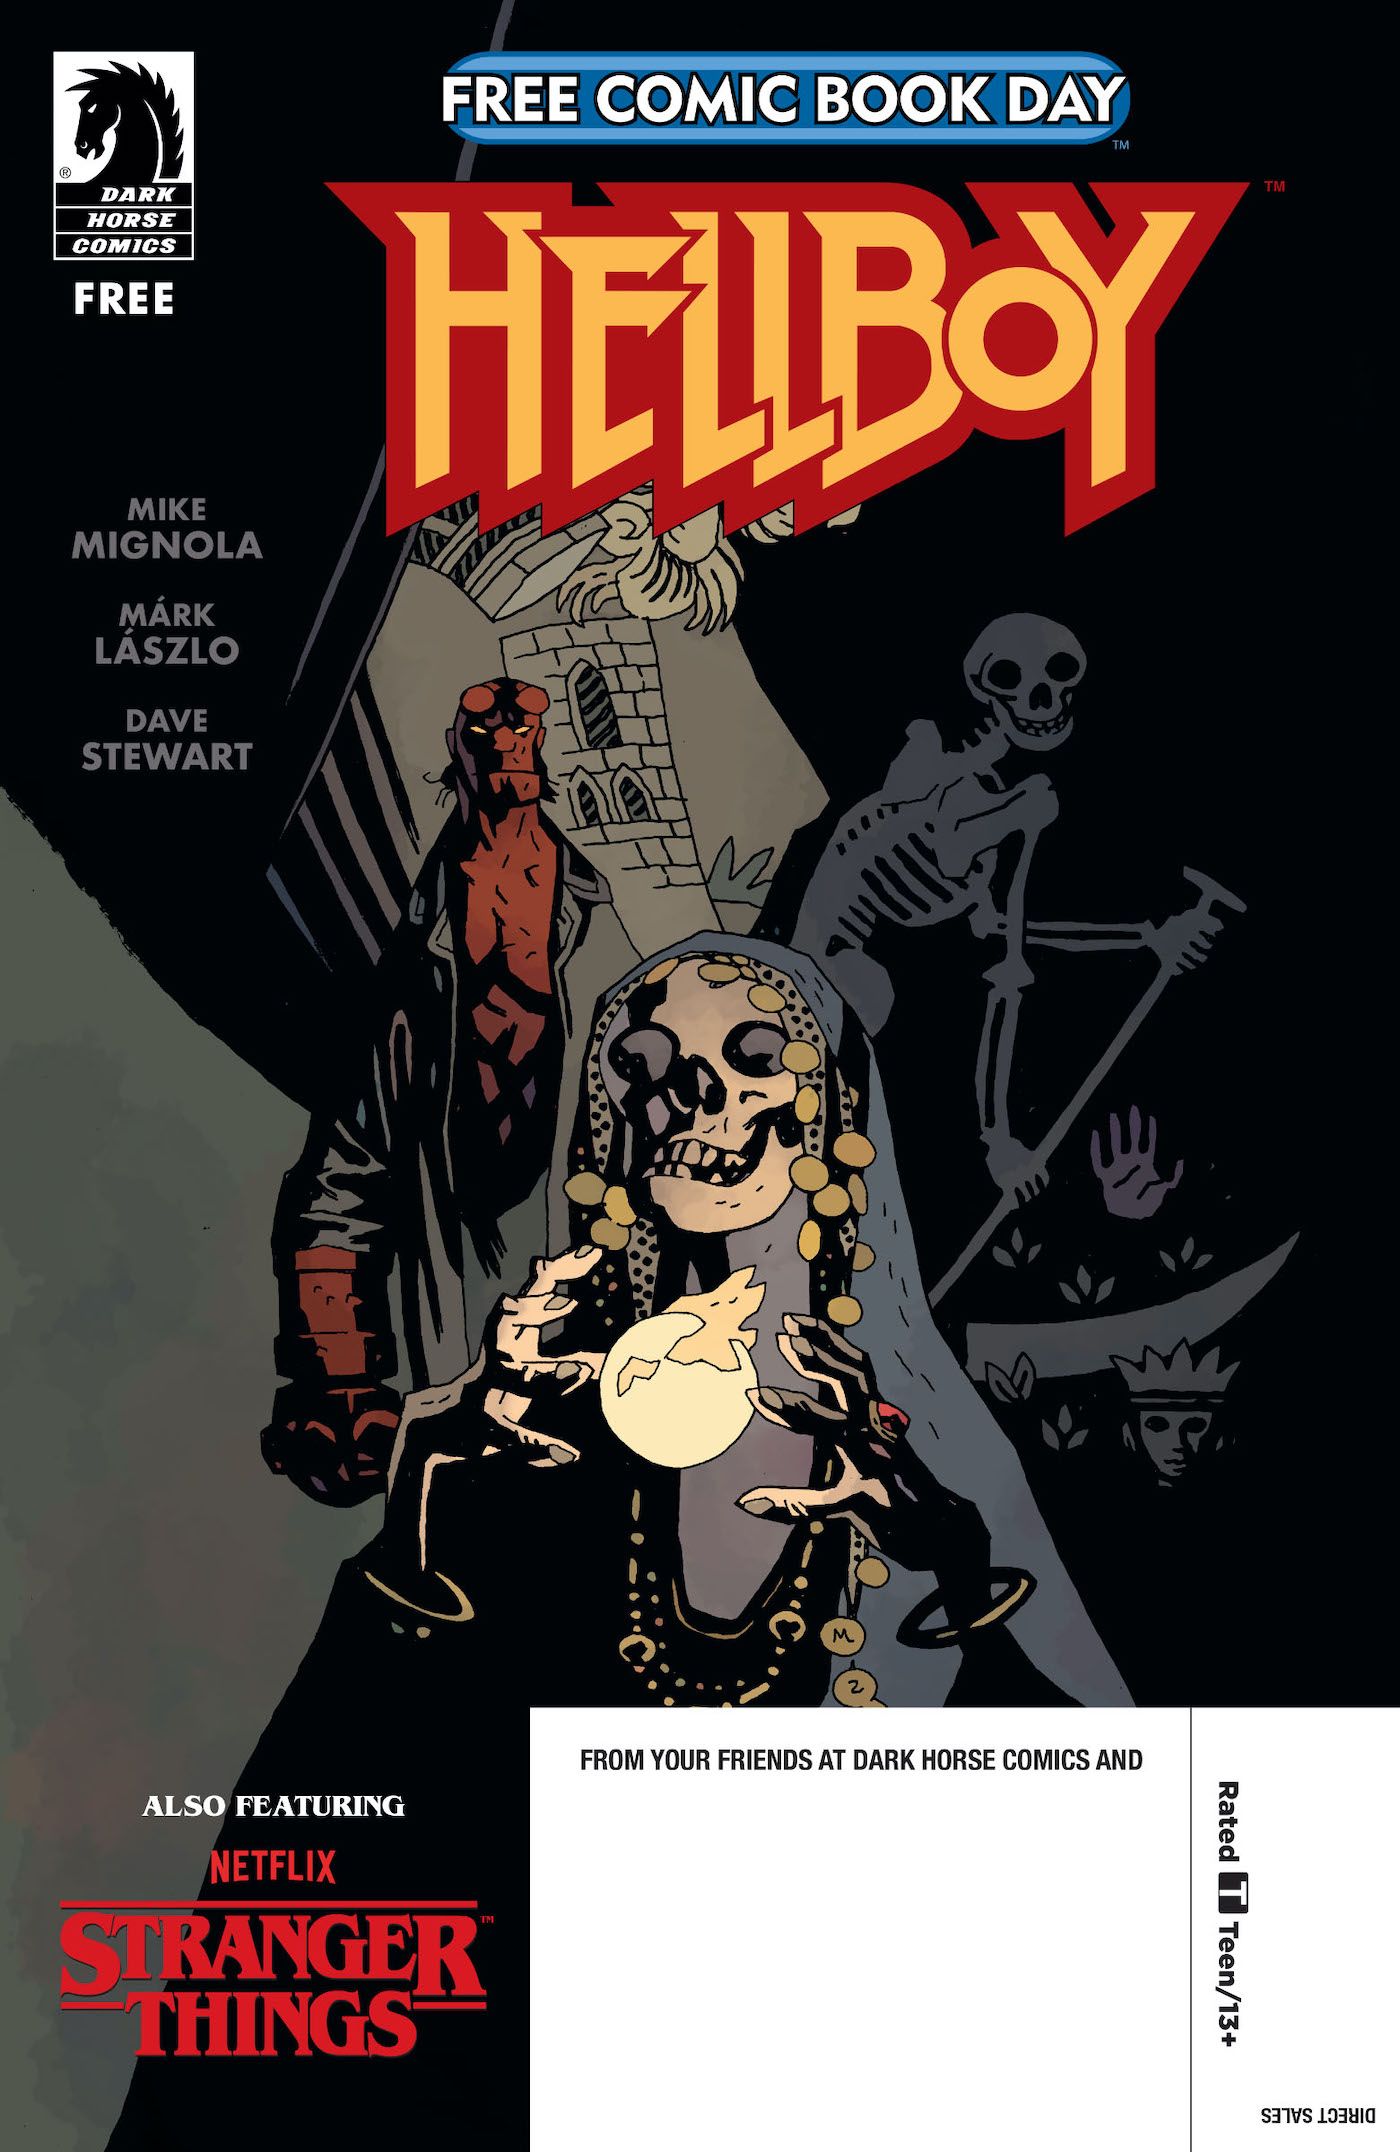 MIke Mignola and Dave Stewart's Free Comic Book Day cover featuring Hellboy.